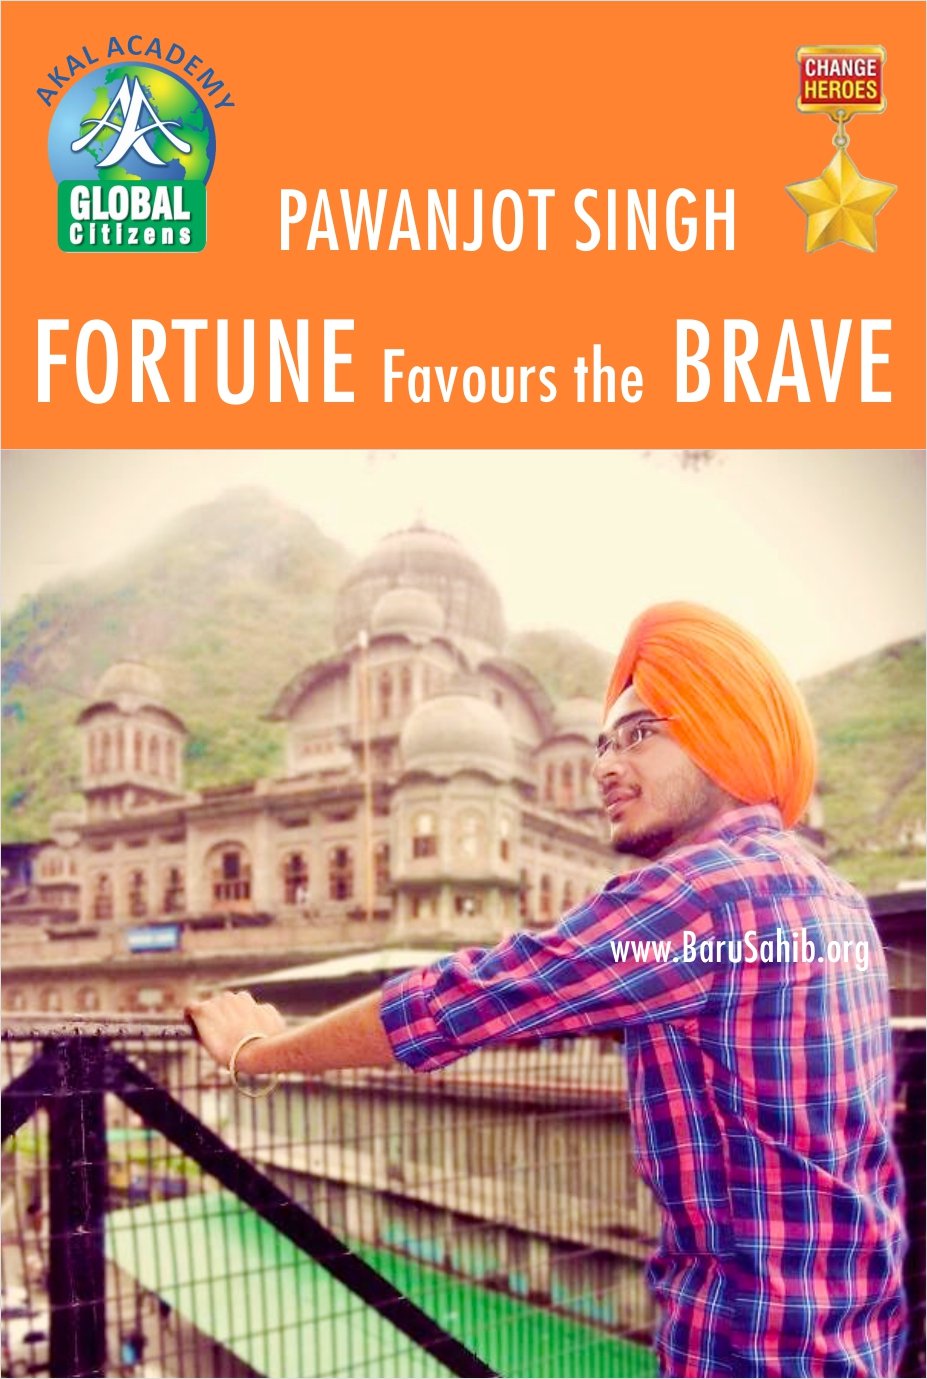 Pawanjot Singh – FORTUNE Favours the Brave